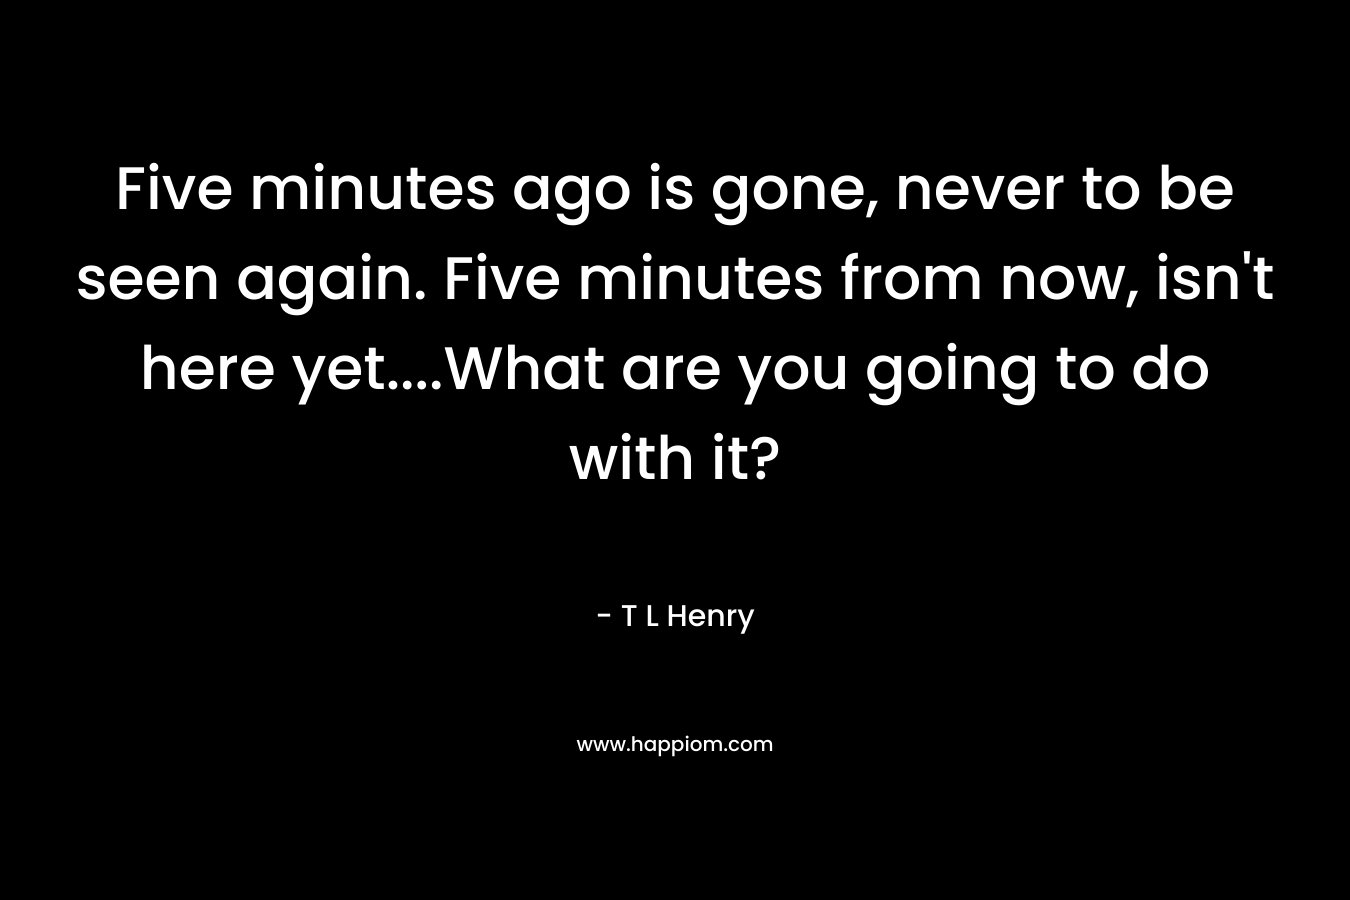 Five minutes ago is gone, never to be seen again. Five minutes from now, isn’t here yet….What are you going to do with it? – T L Henry